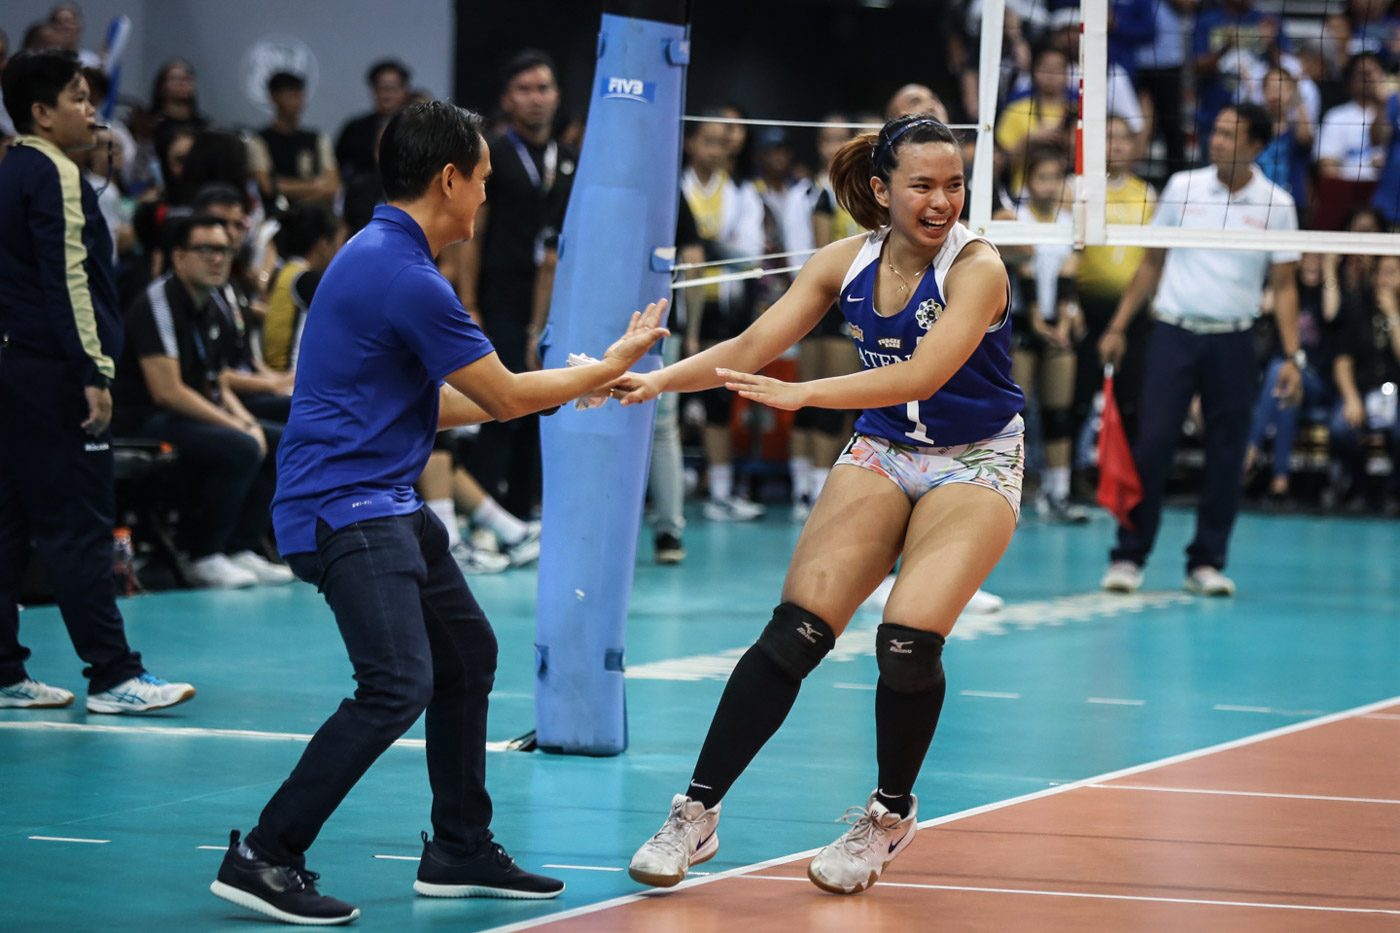 Another Ravena rises as Dani impresses in Ateneo must-win